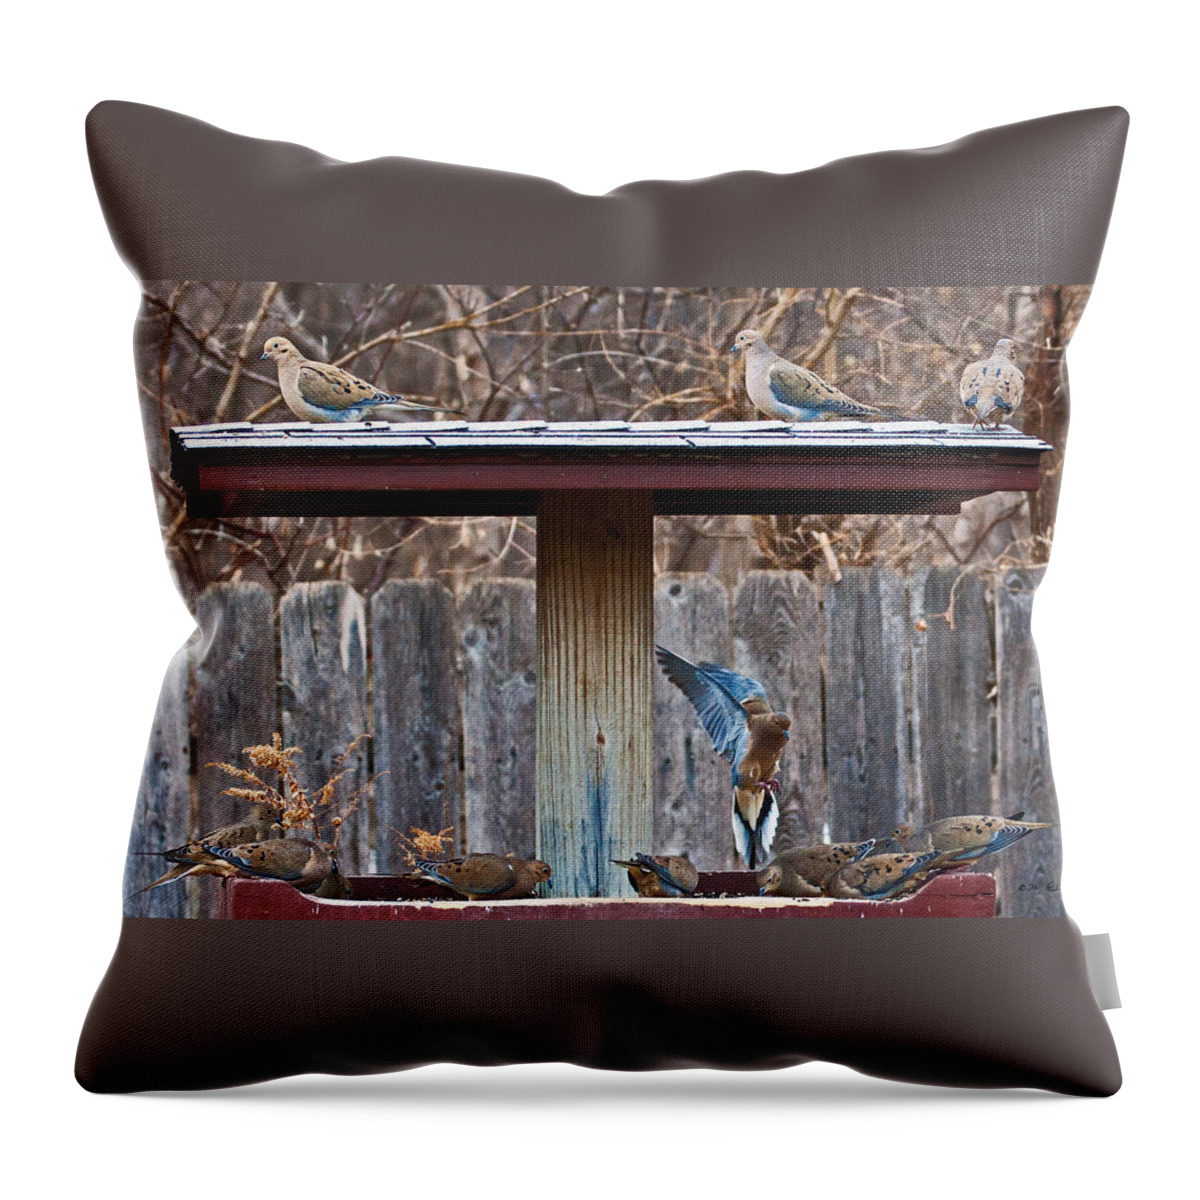 Heron Heaven Throw Pillow featuring the photograph Room For One More by Ed Peterson